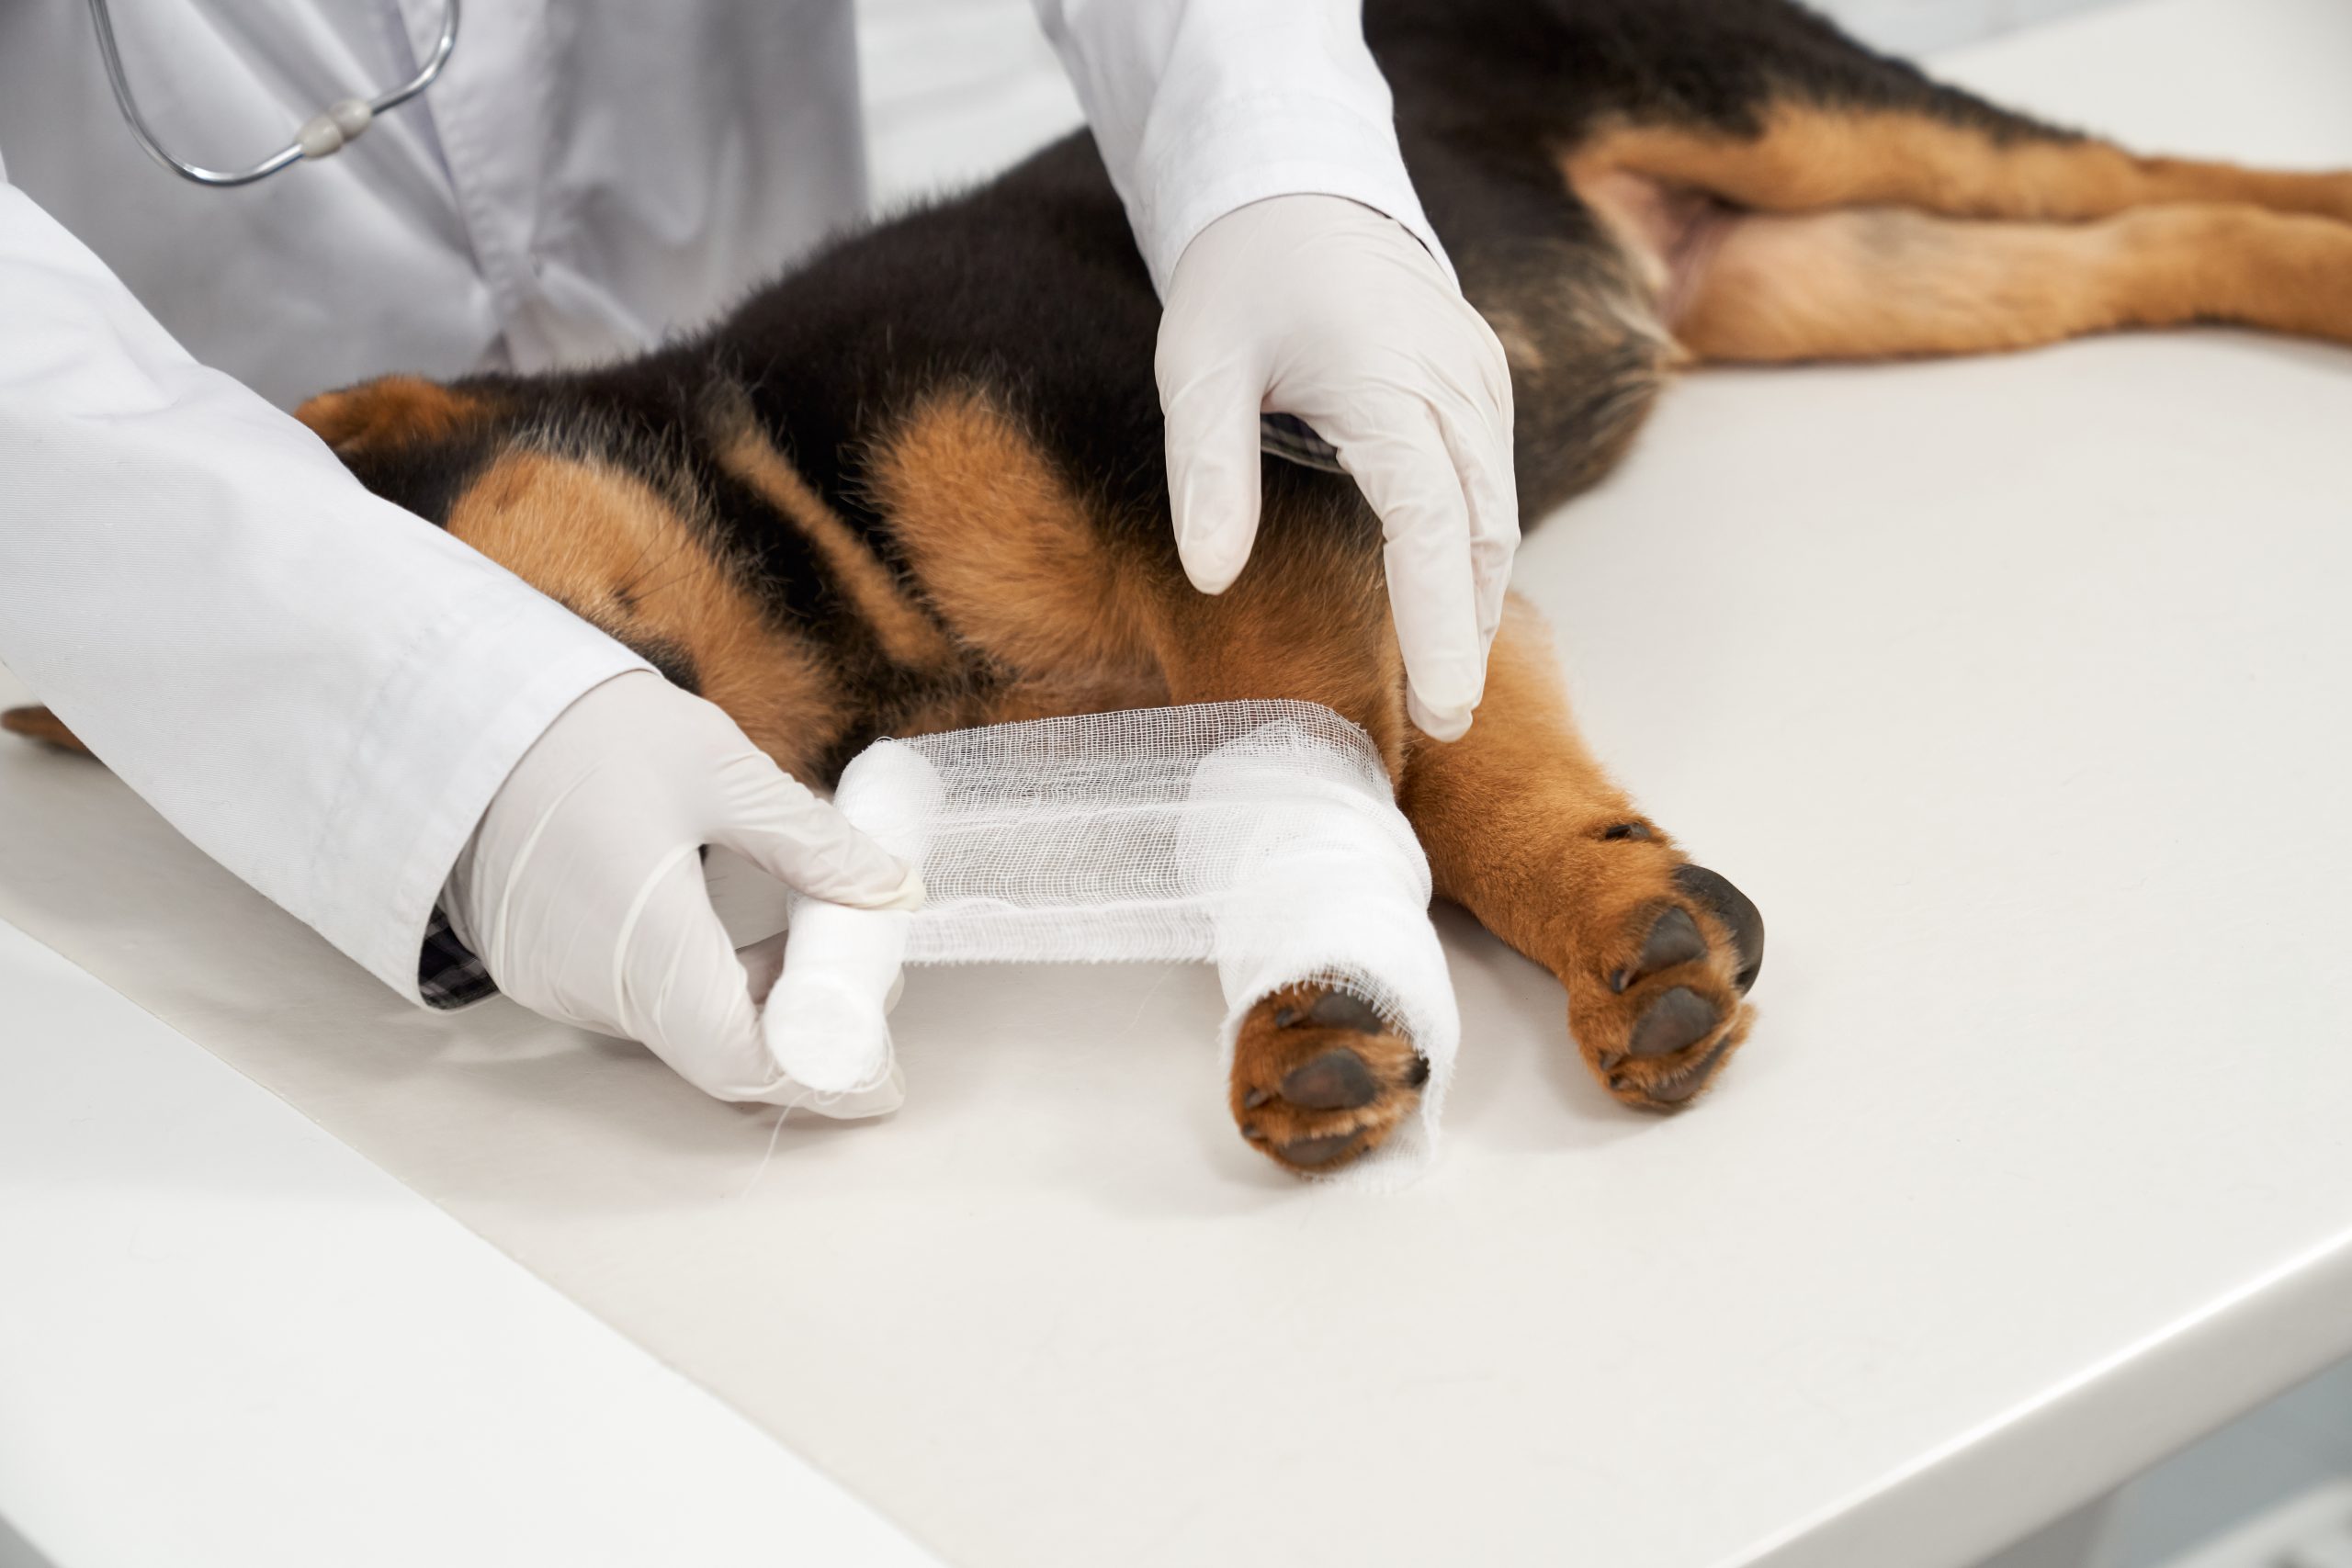 Canine ACL injuries can cause discomfort in dogs. Treatment options depend on the severity.